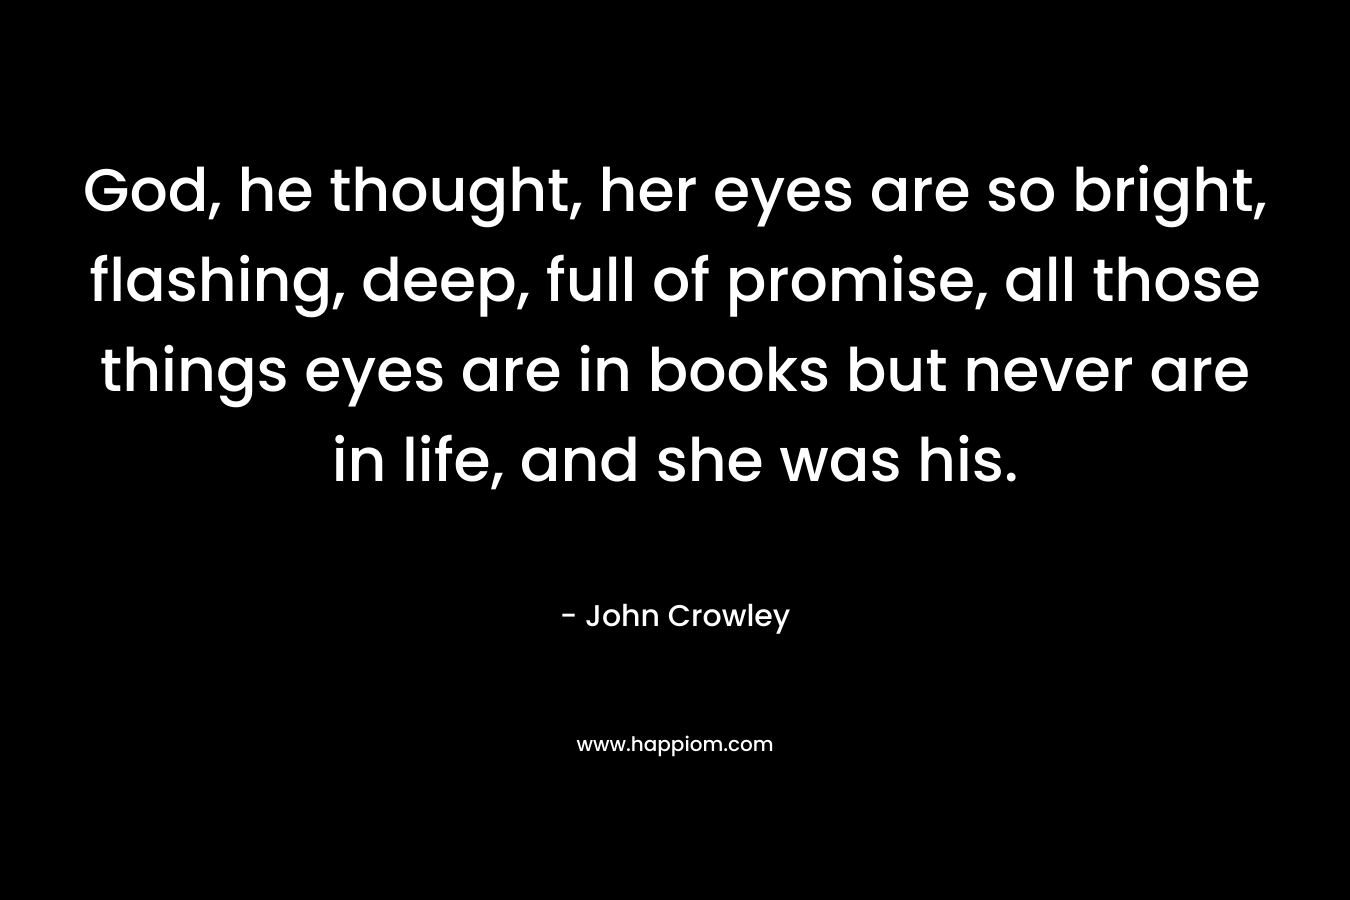 God, he thought, her eyes are so bright, flashing, deep, full of promise, all those things eyes are in books but never are in life, and she was his. – John Crowley